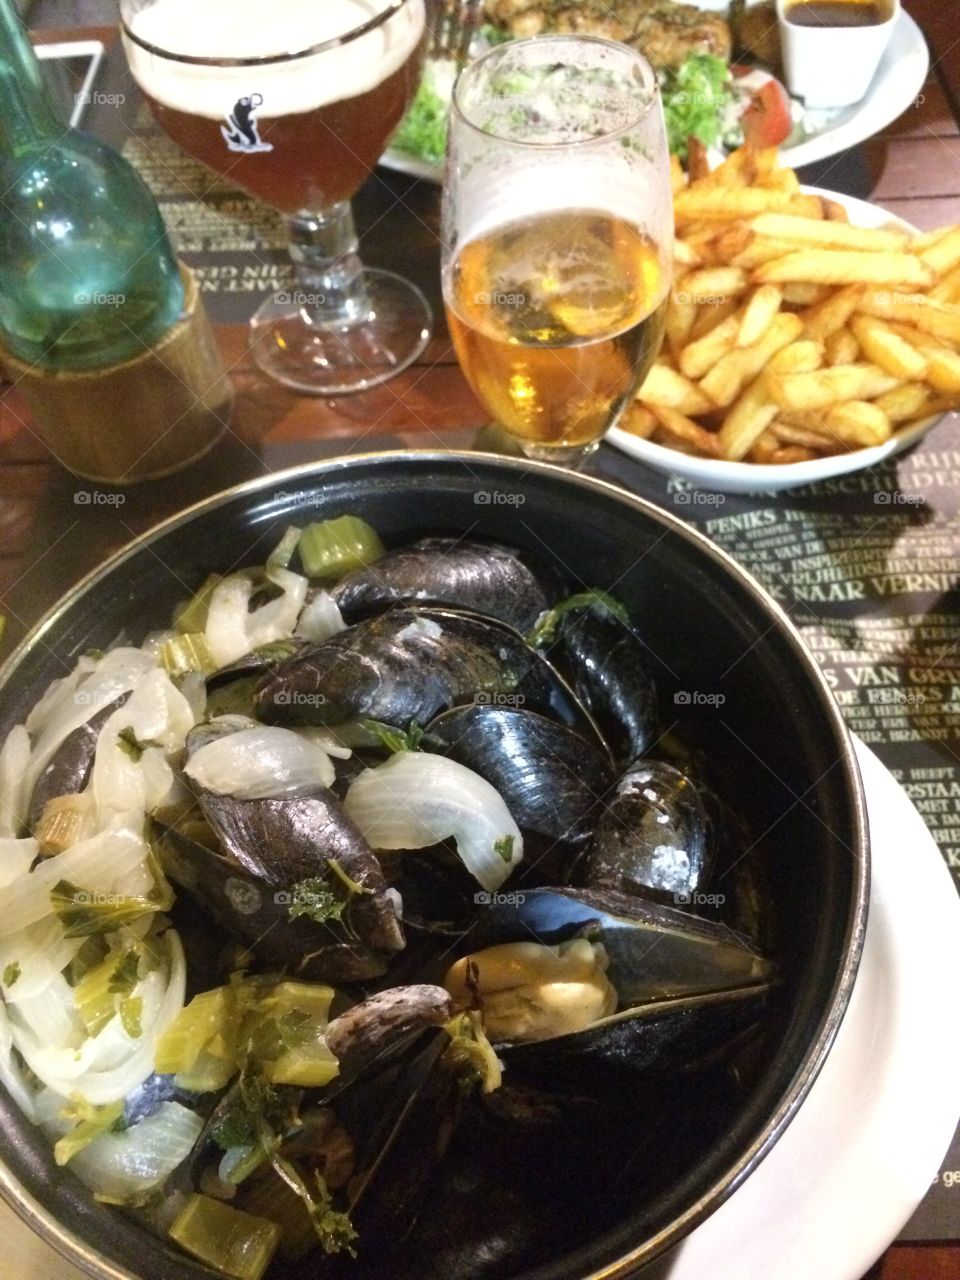 Mussels and fries in Brussels, Belgium